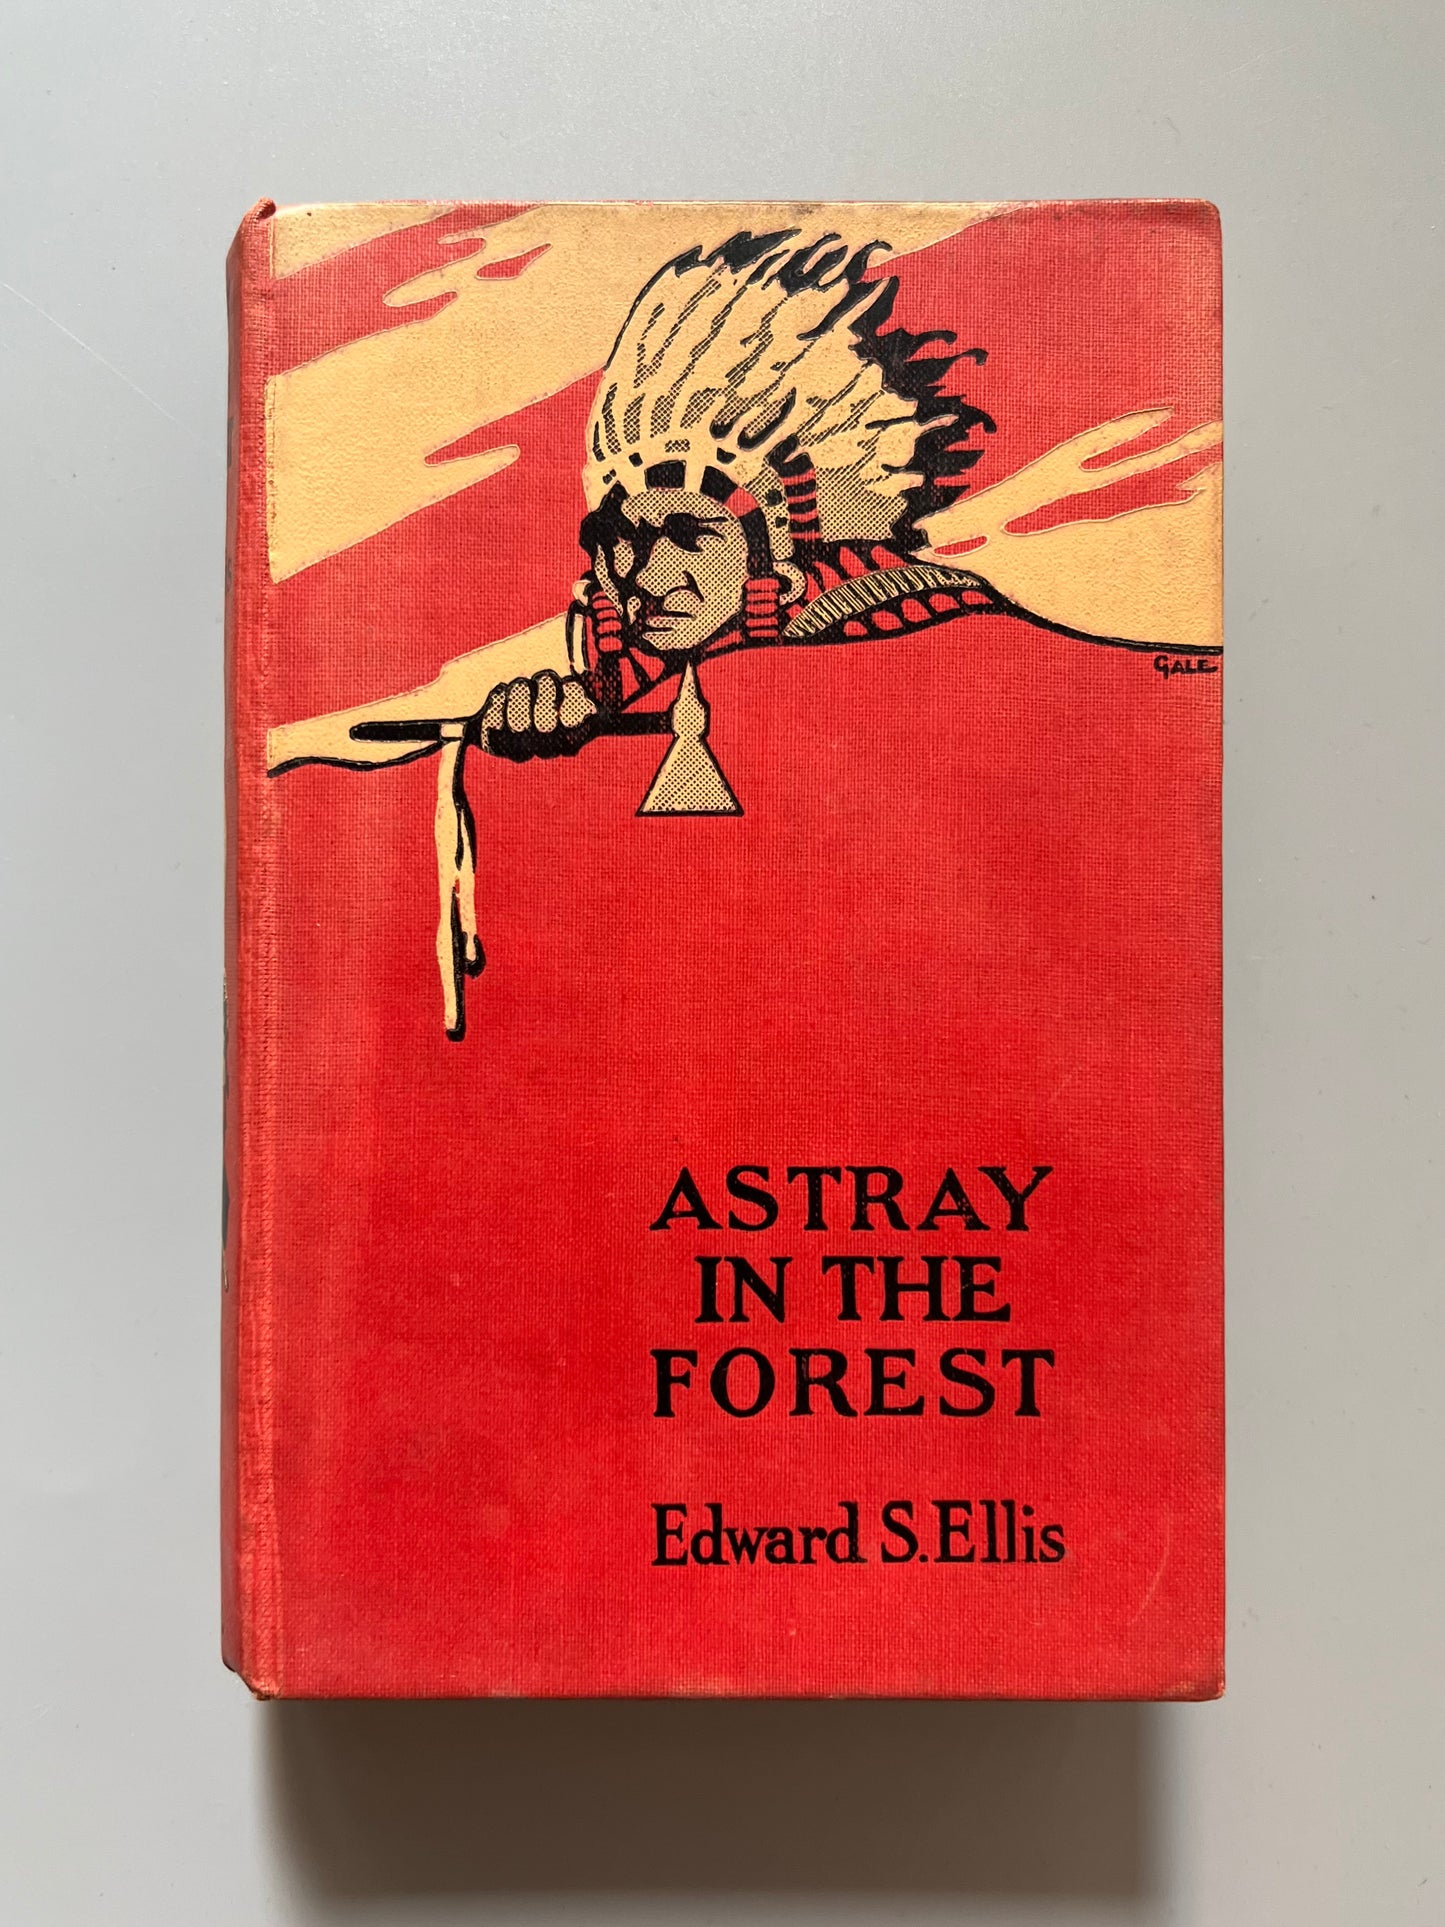 Astray in the forest, Edward S. Ellis - Cassell and Company limited, ca. 1920